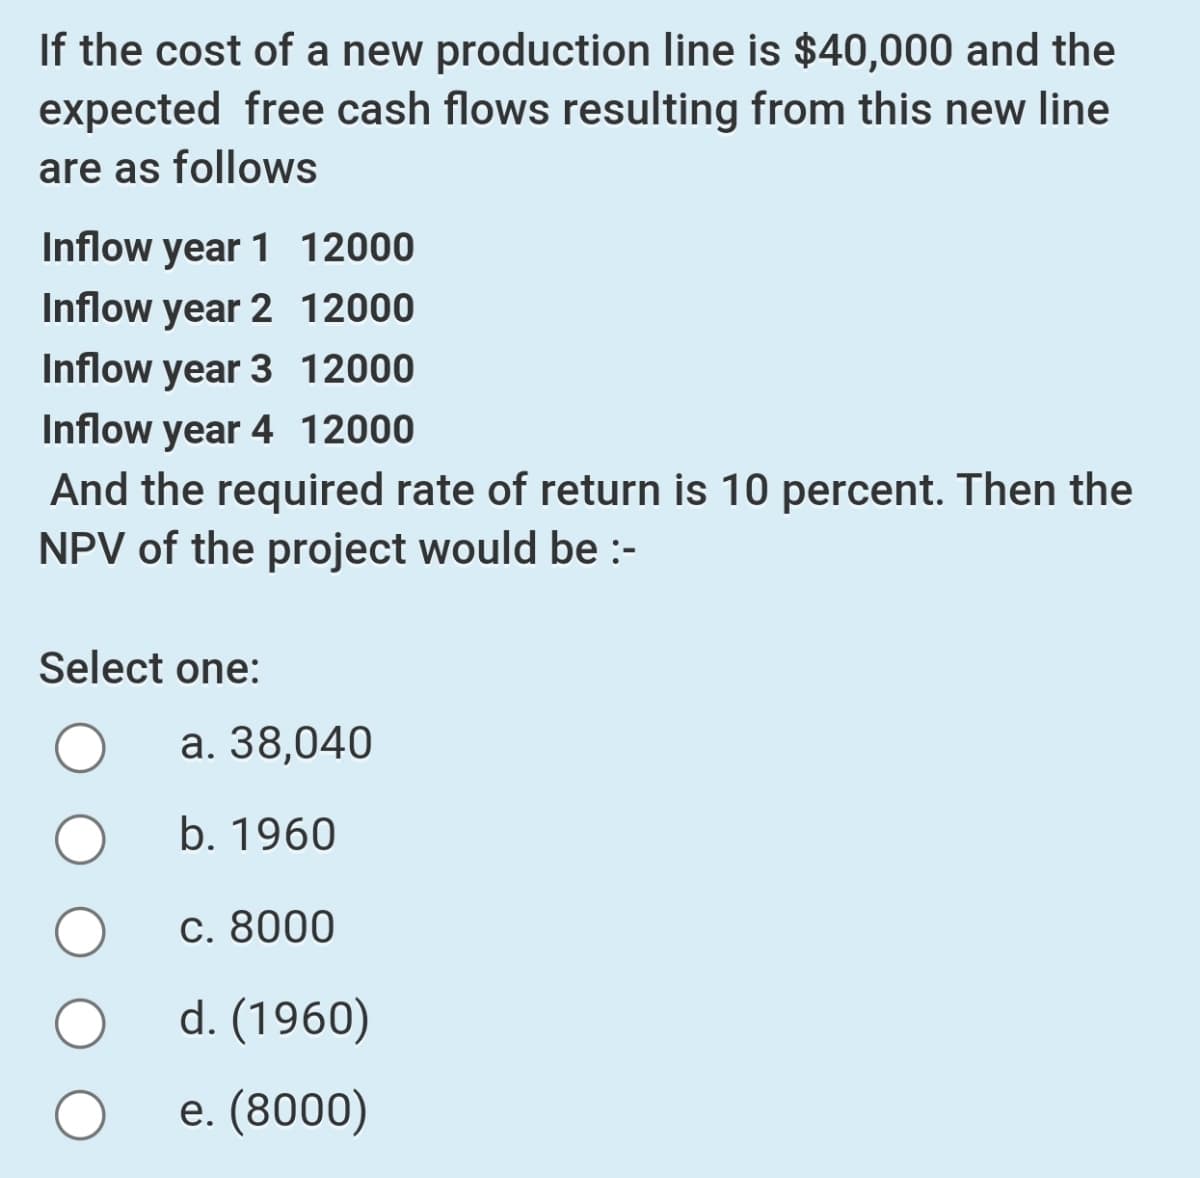 If the cost of a new production line is $40,000 and the
expected free cash flows resulting from this new line
are as follows
Inflow year 1 12000
Inflow year 2 12000
Inflow year 3 12000
Inflow year 4 12000
And the required rate of return is 10 percent. Then the
NPV of the project would be :-
Select one:
а. 38,040
b. 1960
C. 8000
d. (1960)
e. (8000)
